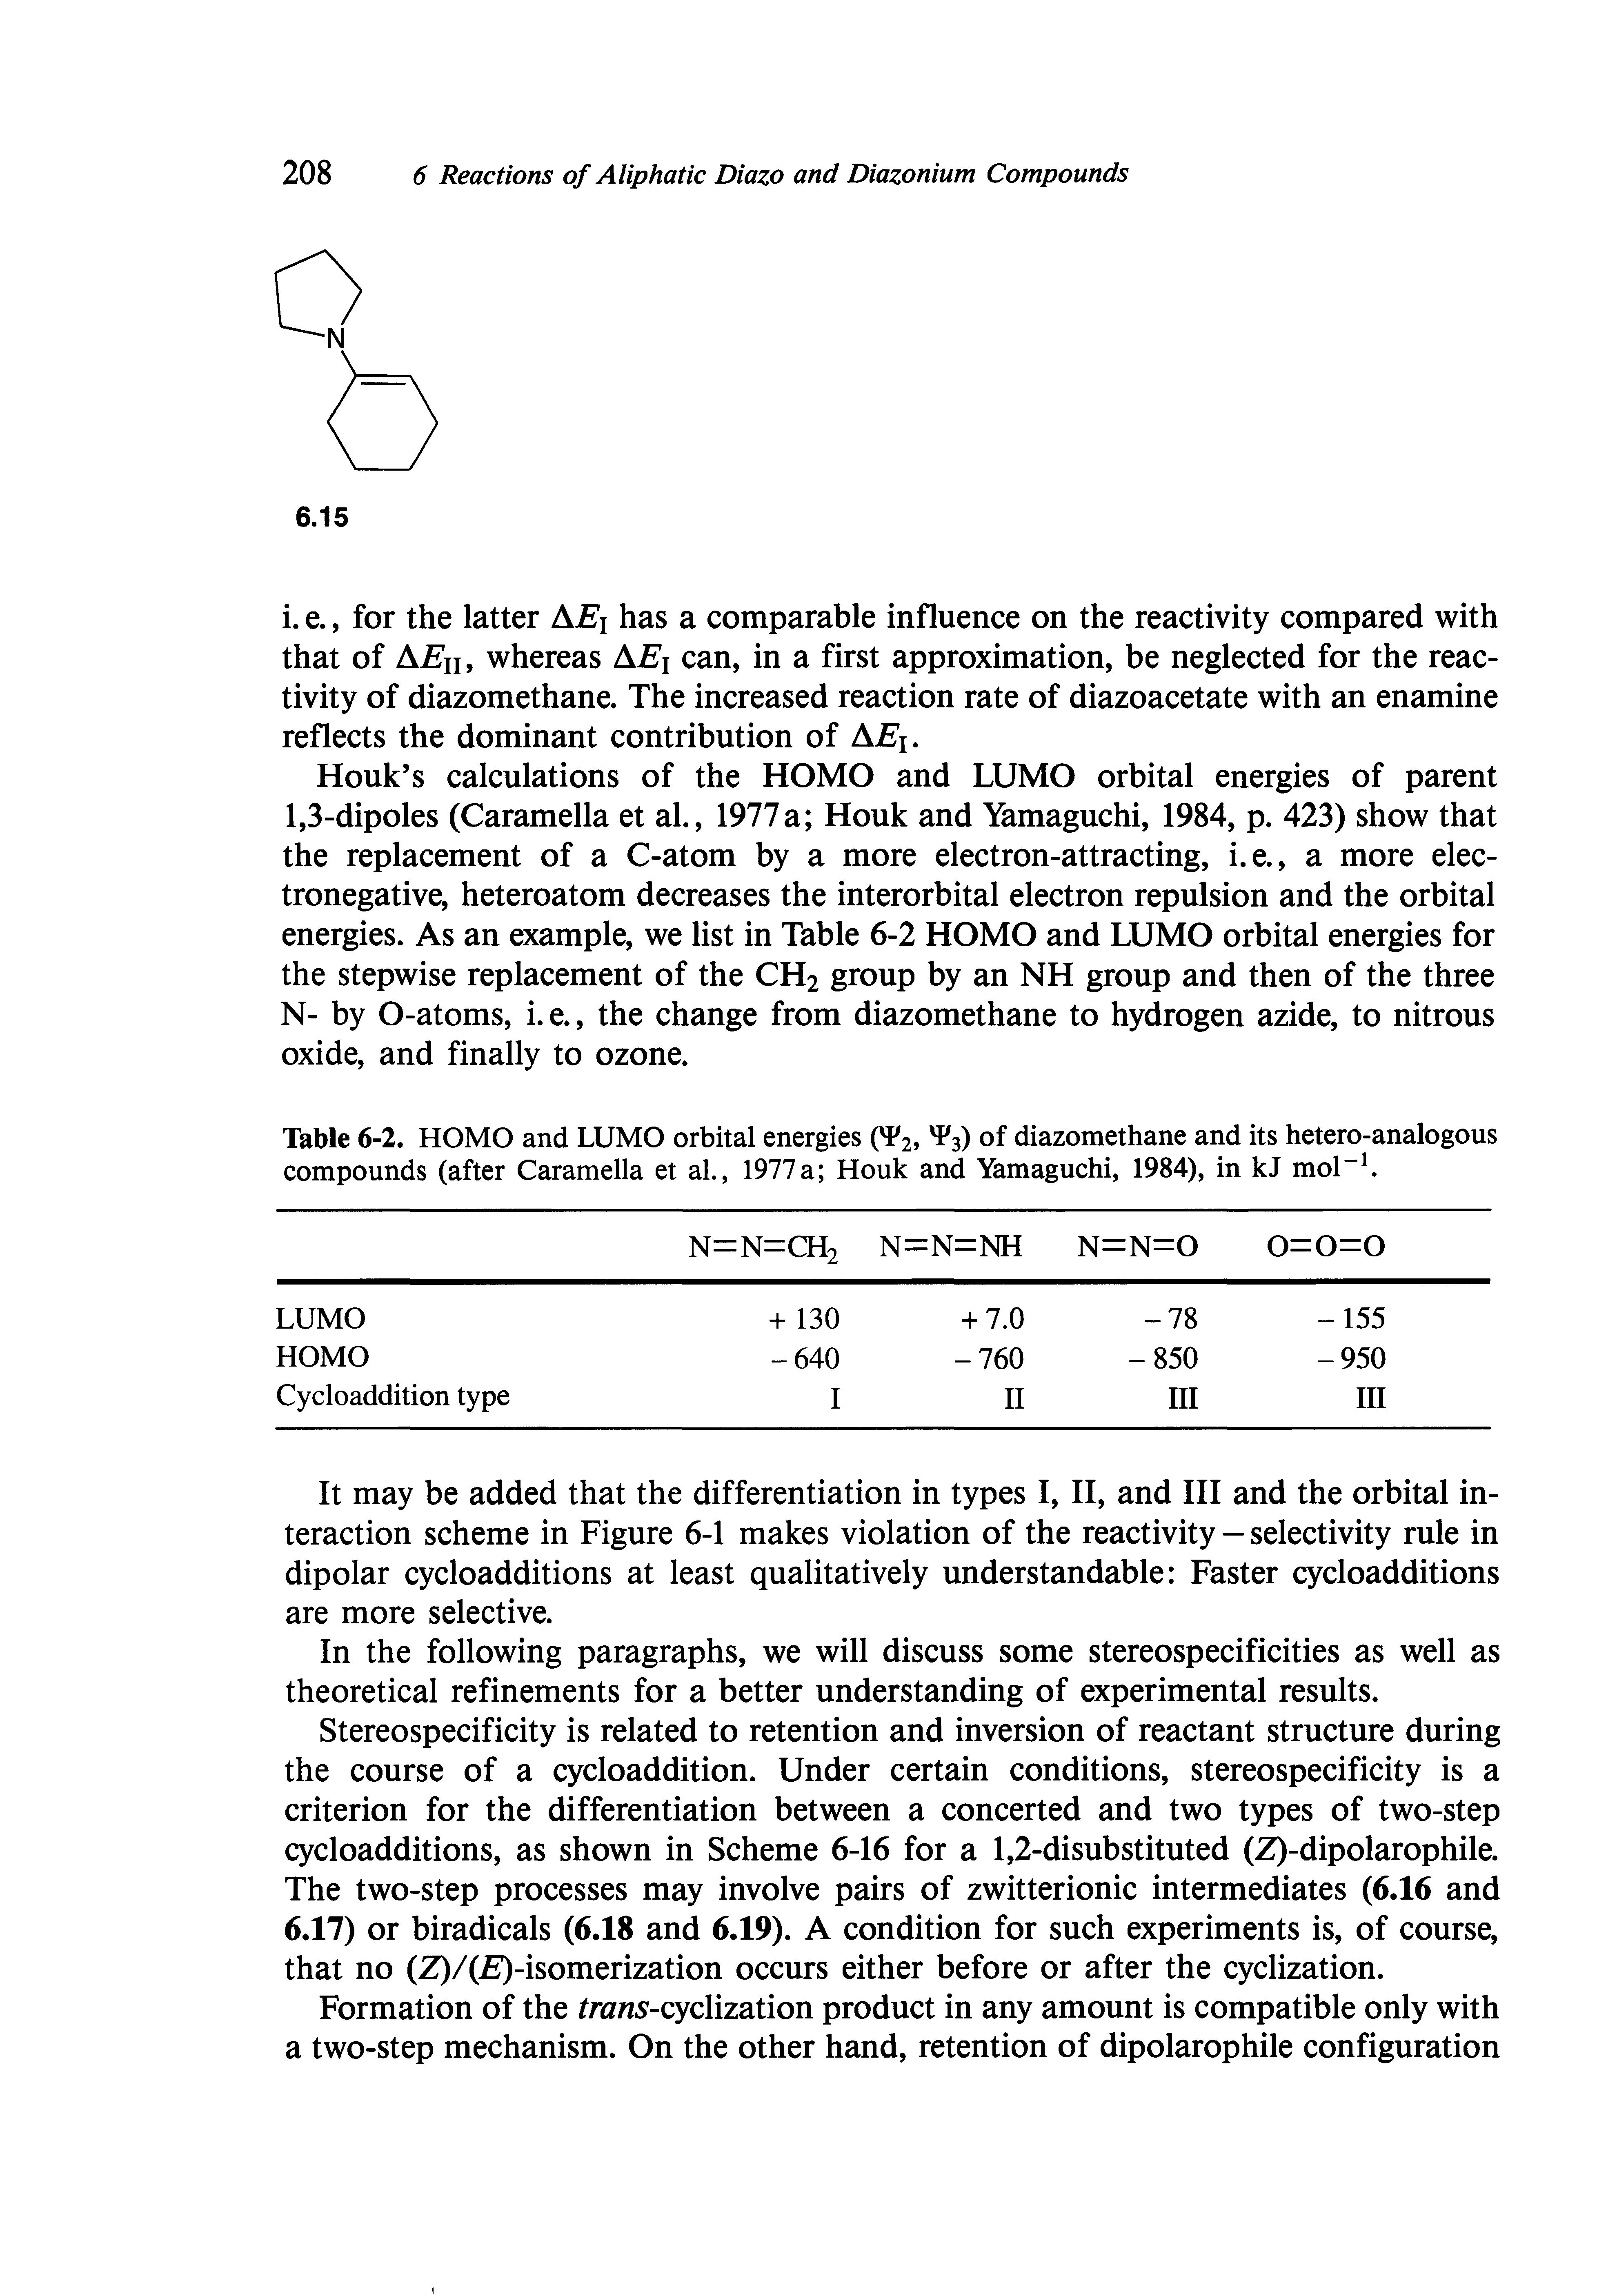 Table 6-2. HOMO and LUMO orbital energies (T2, T3) of diazomethane and its hetero-analogous compounds (after Caramella et al., 1977a Houk and Yamaguchi, 1984), in kJ mol ...